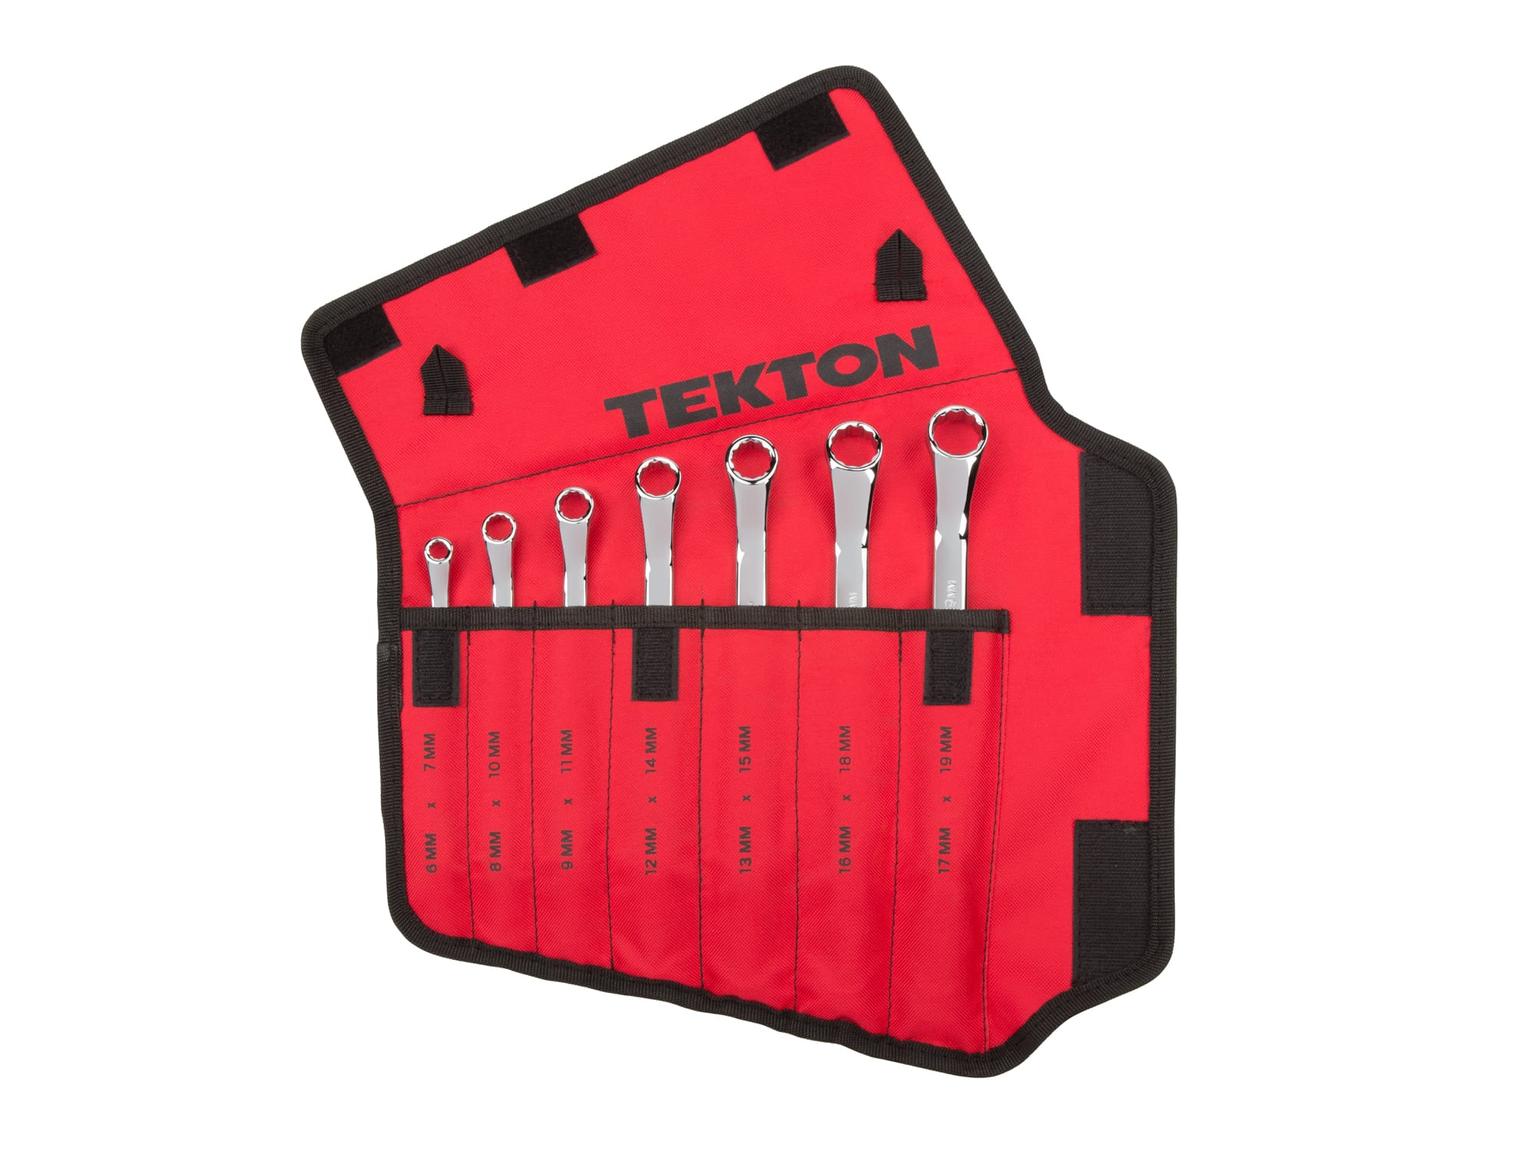 TEKTON WBE24507-T 45-Degree Offset Box End Wrench Set with Pouch, 7-Piece (6-19 mm)